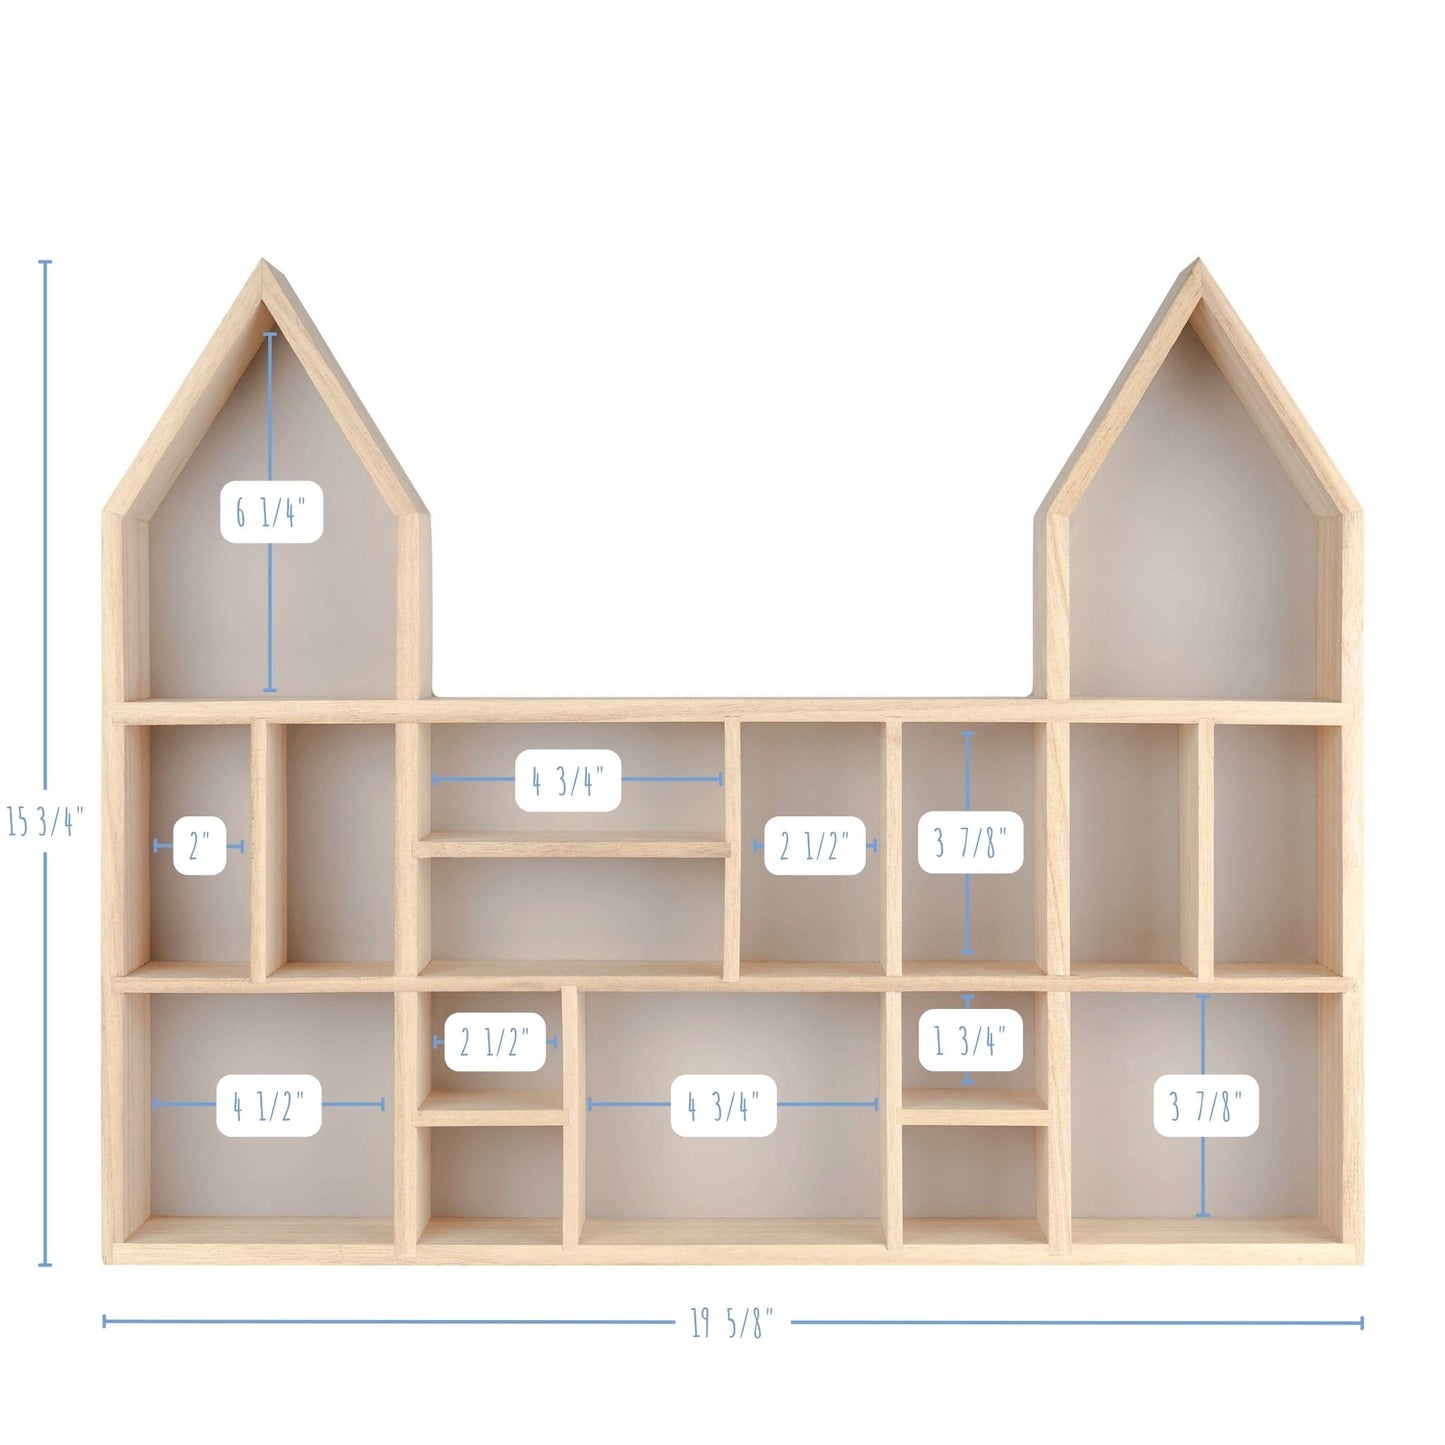 Castle shaped wooden toy display shelf with a gray-colored backboard - with compartments size detailed (front view)